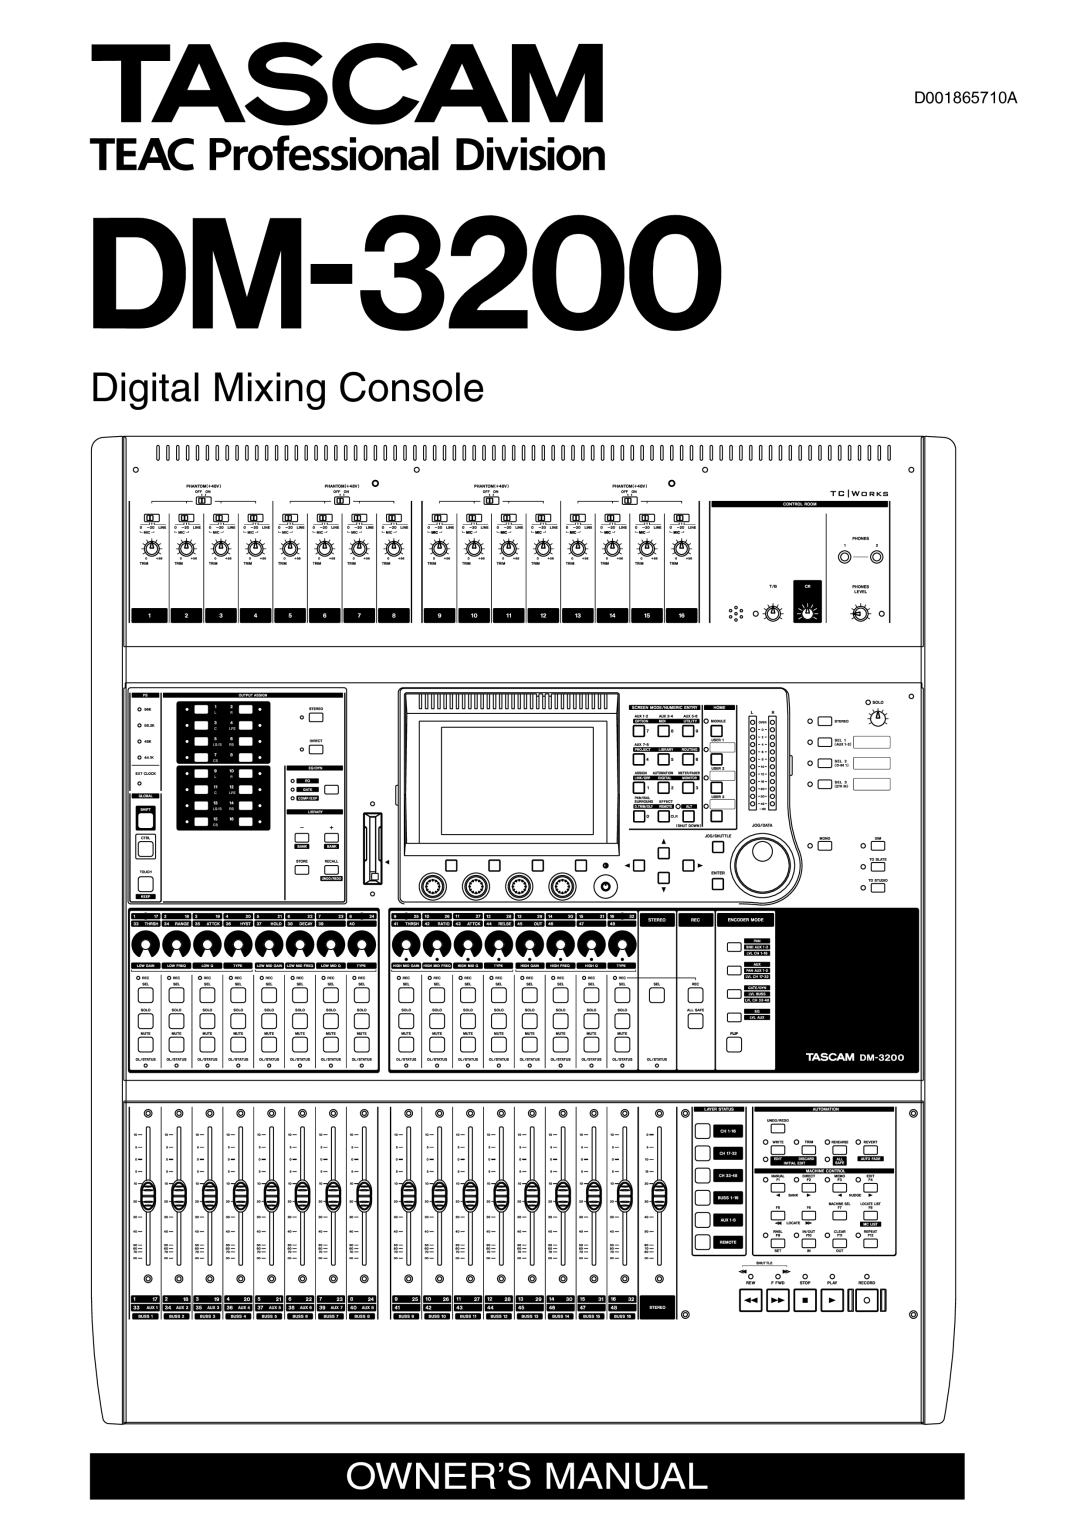 Tascam DM-3200 owner manual Digital Mixing Console, Owner’S Manual, D001865710A 